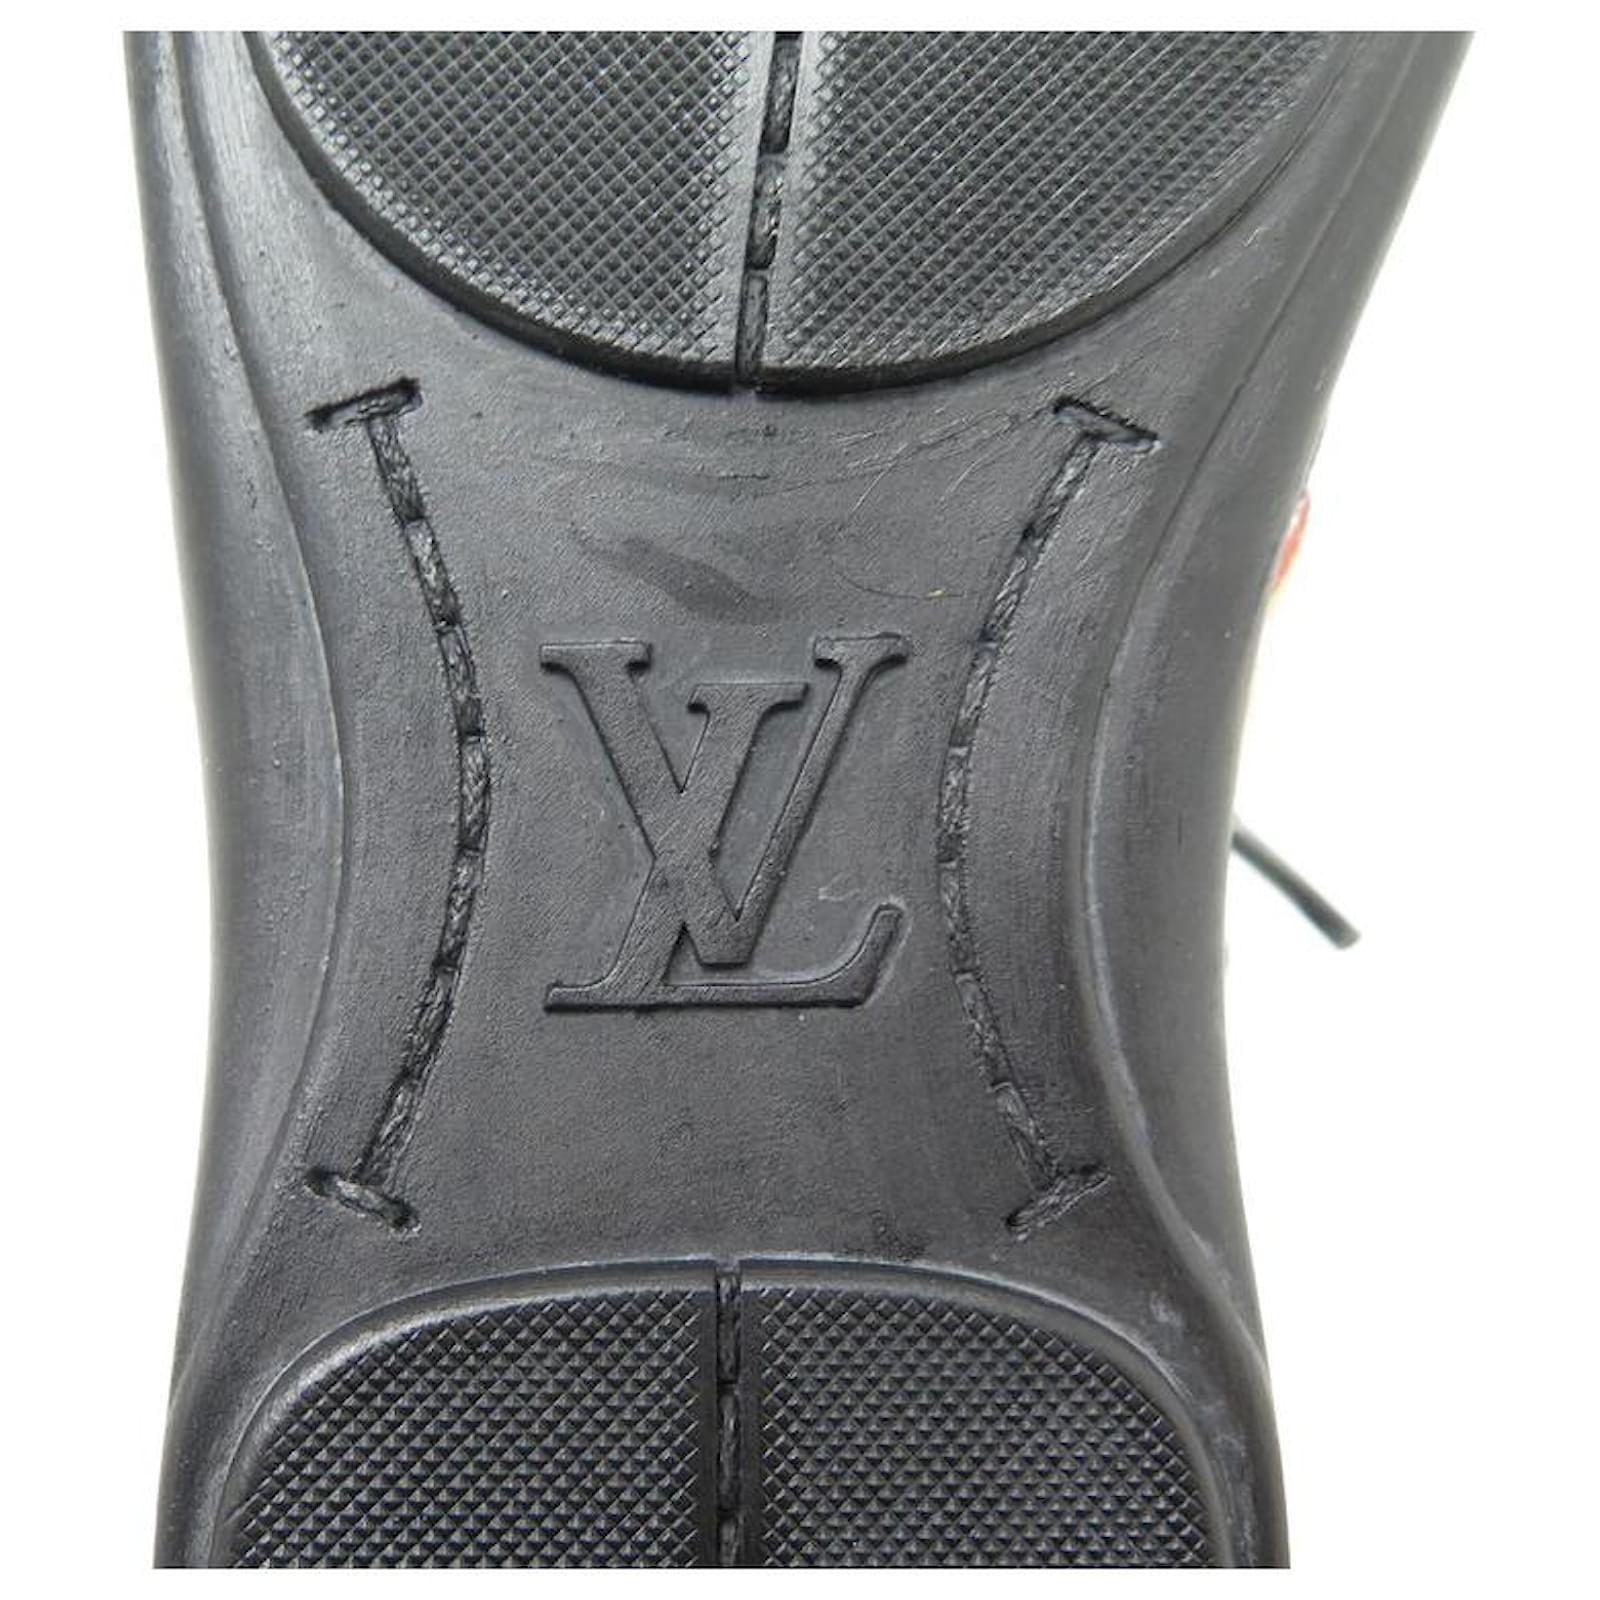 LOUIS VUITTON TRAINER SNEAKERS 37 LEATHER PERFORATED SNEAKERS SHOES Black  ref.902362 - Joli Closet